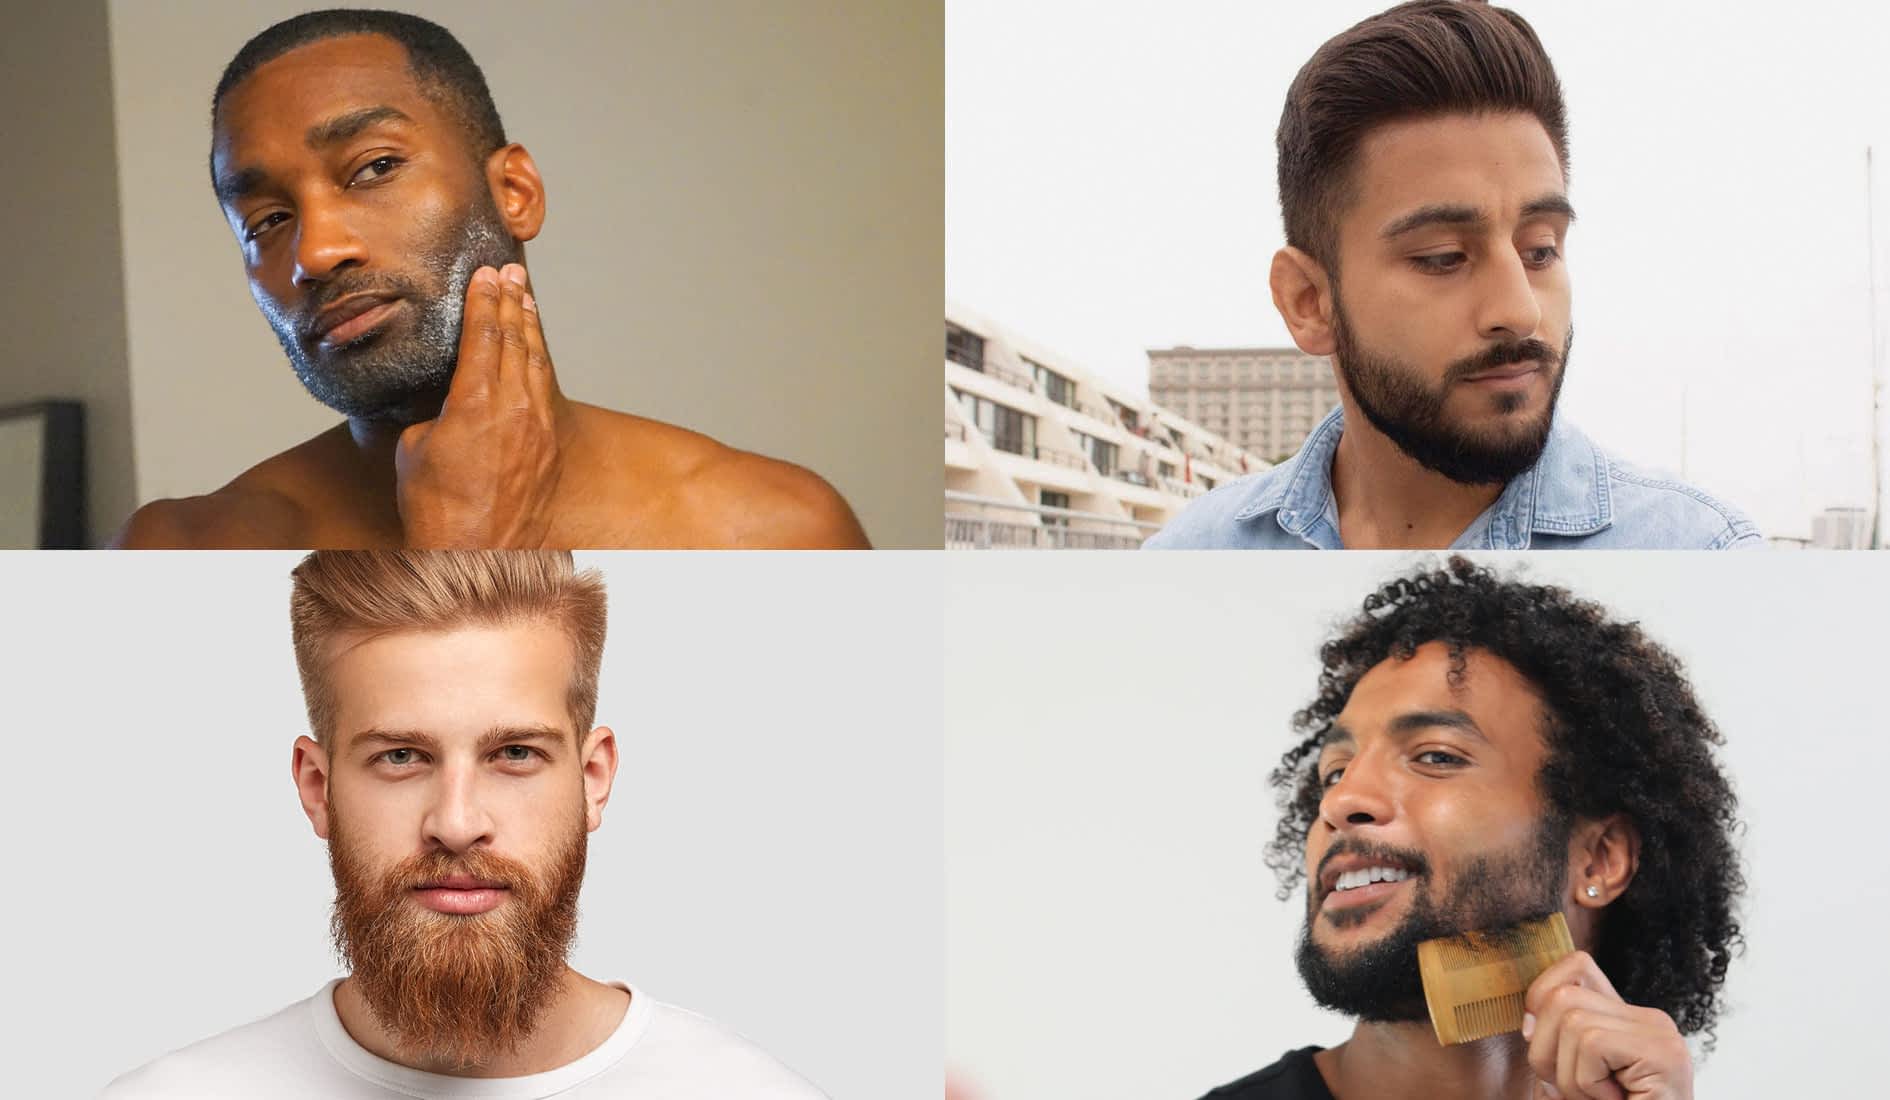 In-Depth Guide on How to Grow a Beard Faster and Naturally | Cremo Blog